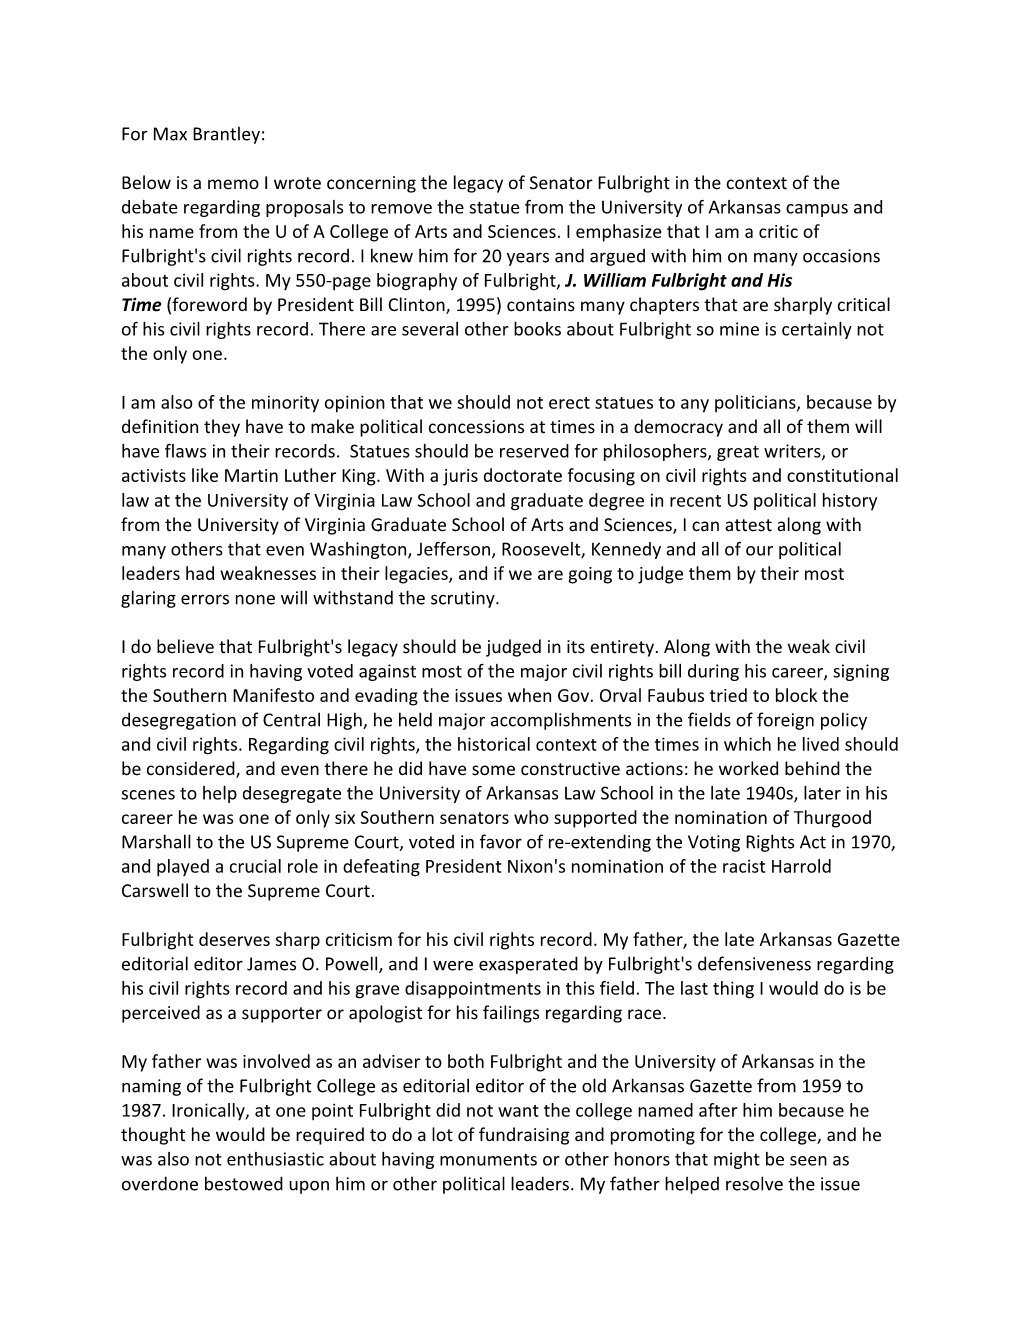 Below Is a Memo I Wrote Concerning the Legacy of Senator Fulbright In